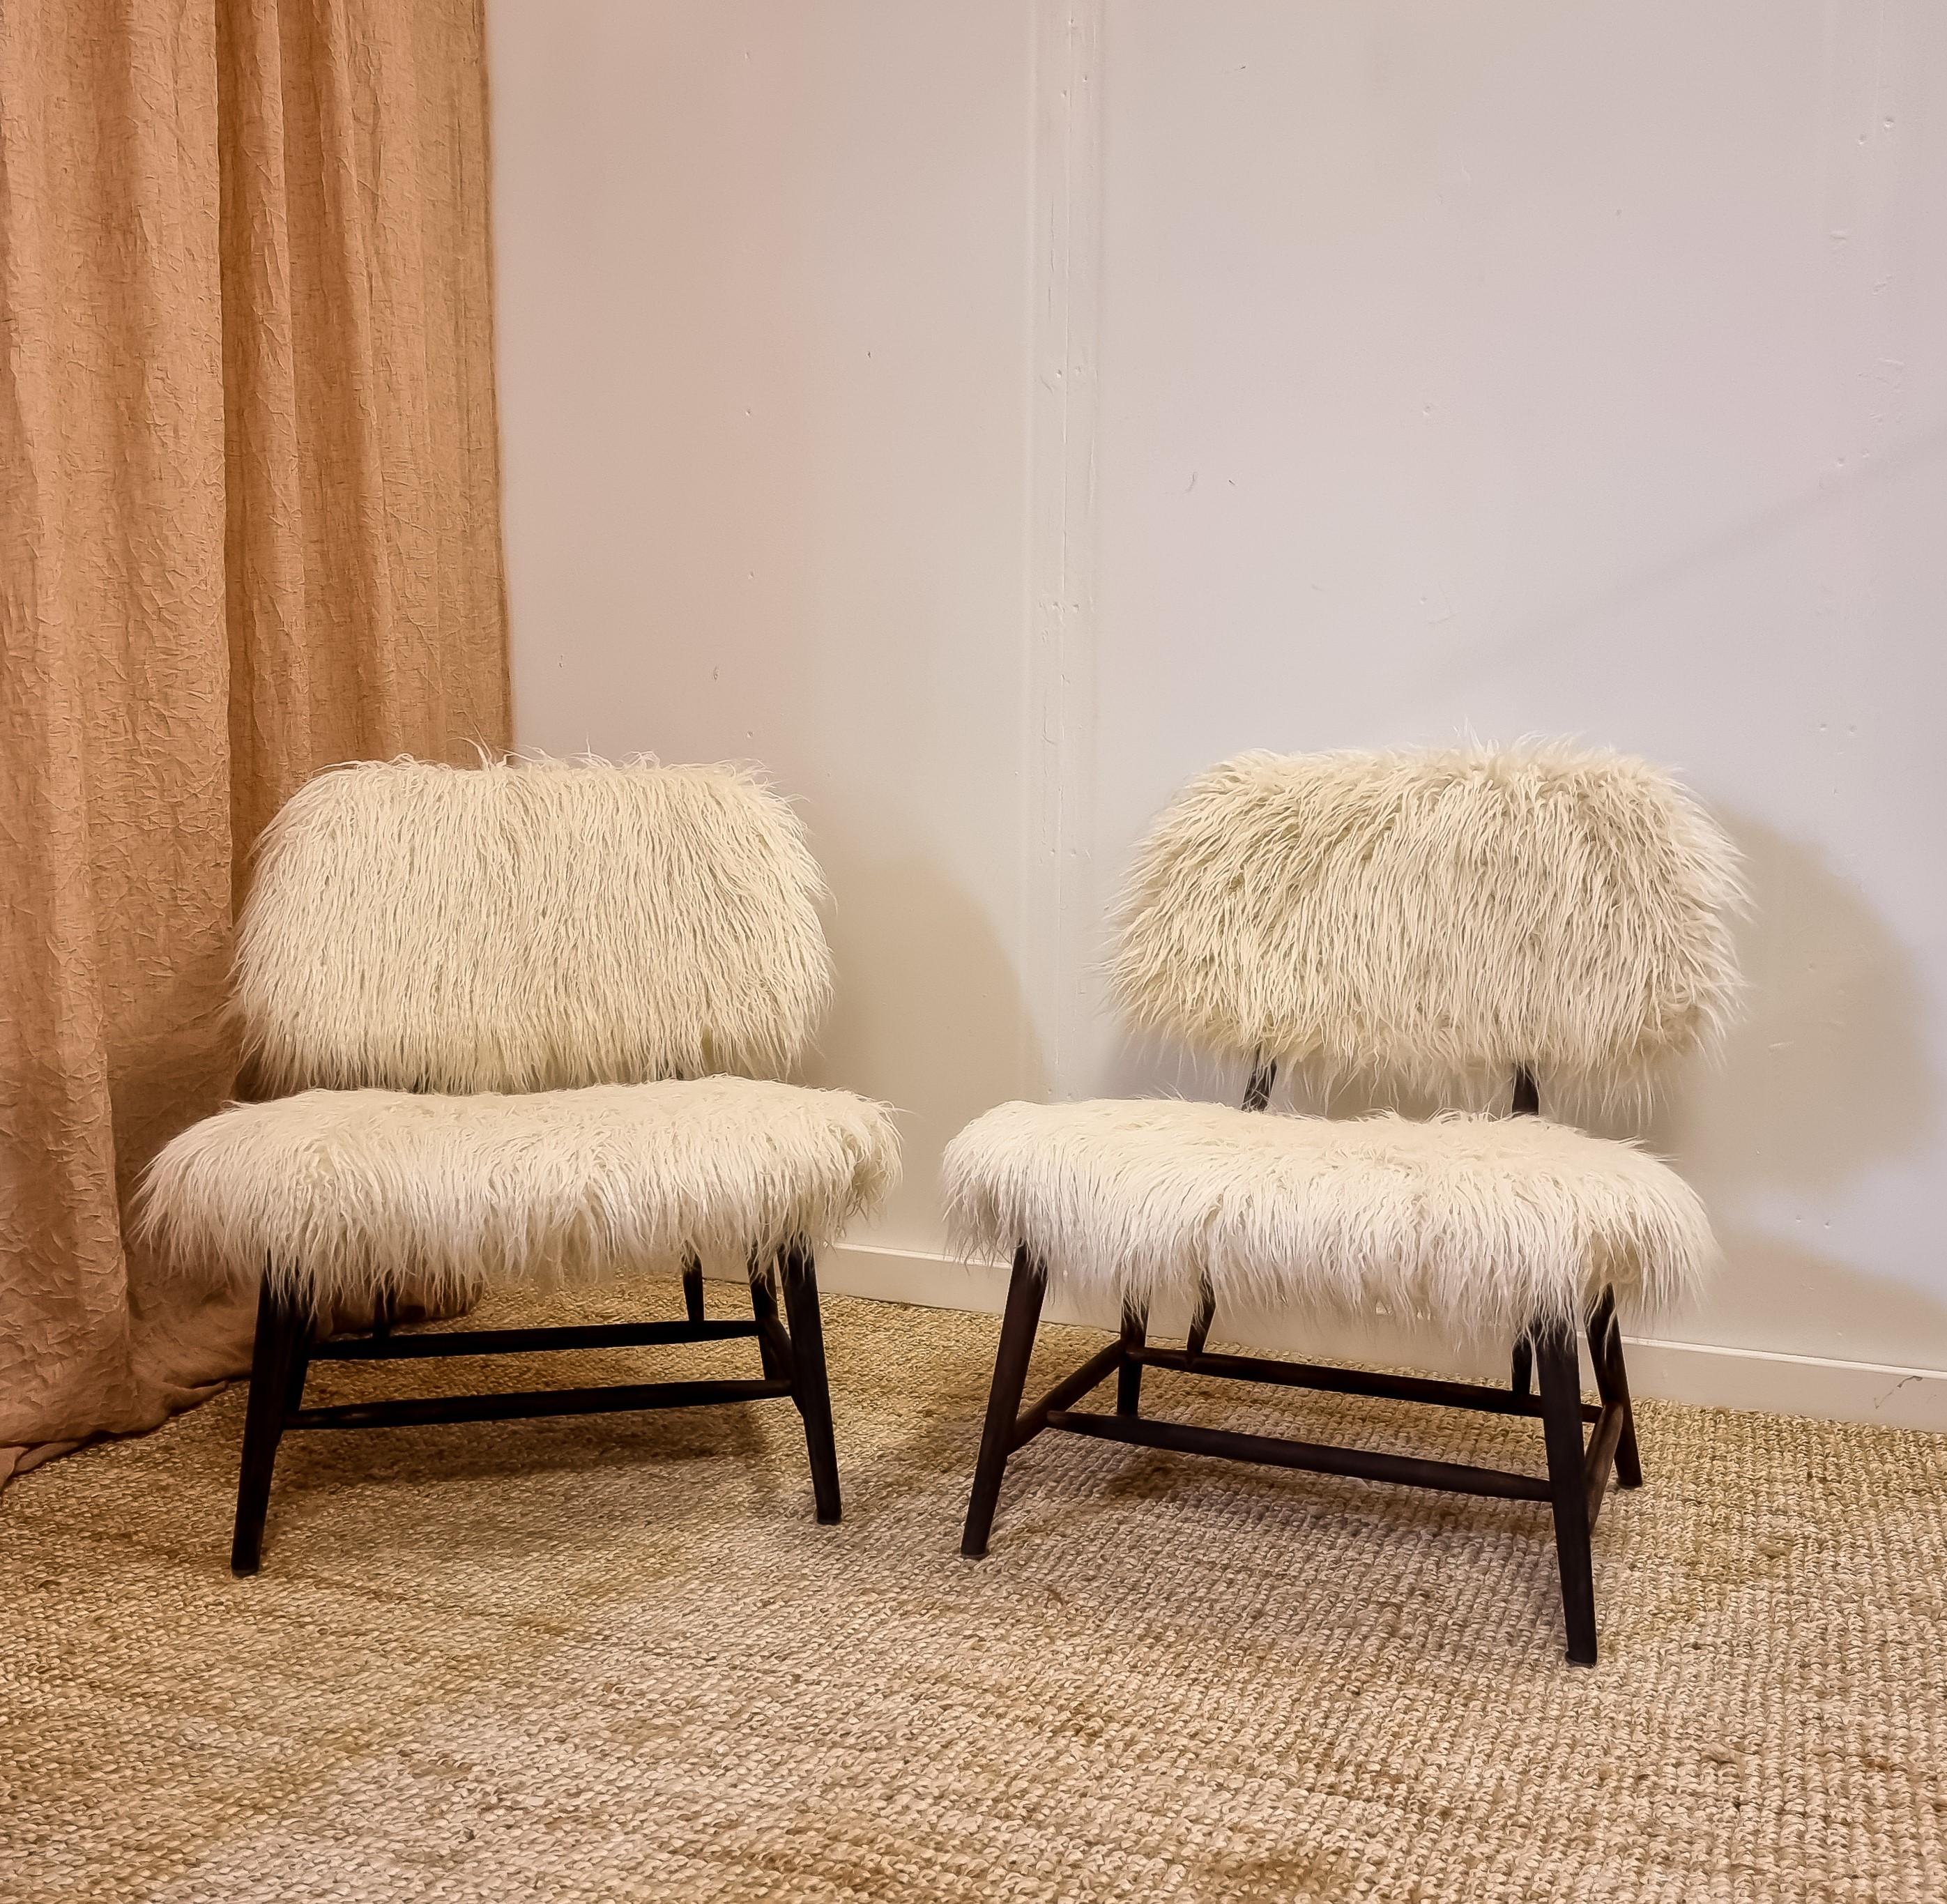 A pair of iconic TeVe-chairs by Alf Svensson for Ljungs industrier, Sweden mid-1900s.

Reupholstered in Maison Pierre Frey-fabric. Stained wood, dark brown. Marked with metal plate. Part of Bra Bohag-series, designed 1953. 

In fair condition, signs